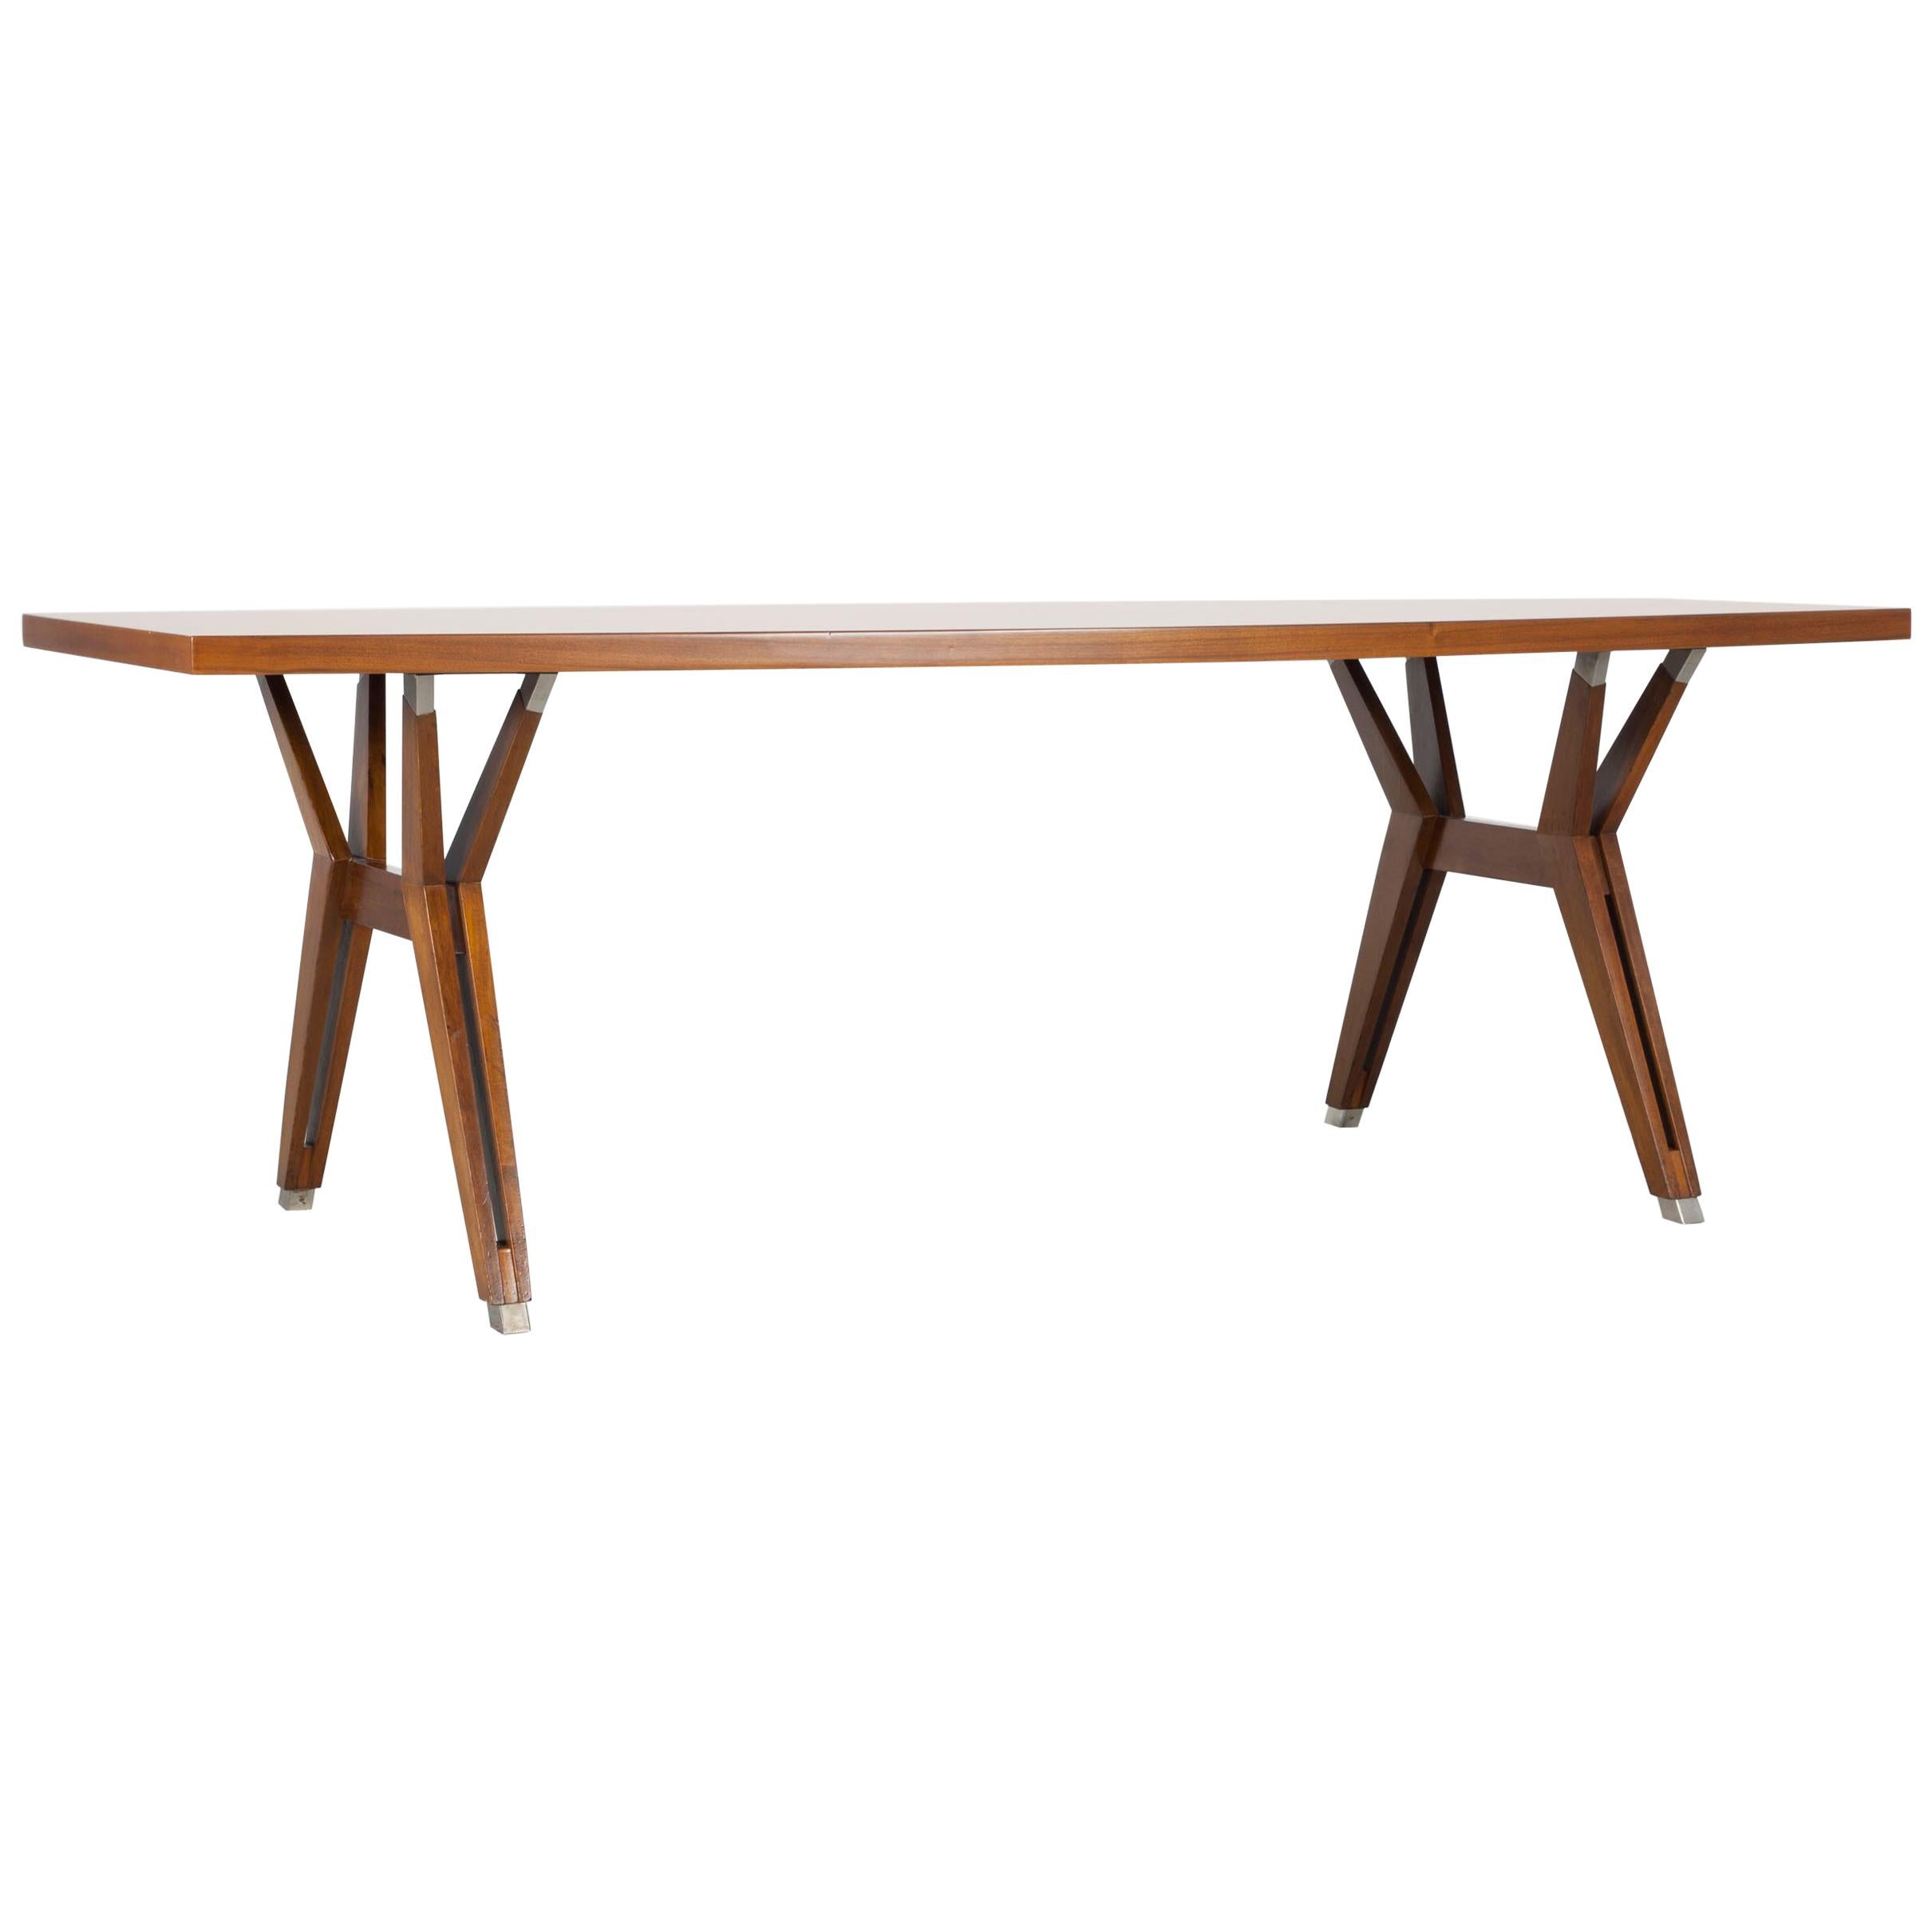 Ico Parisi Italian Wooden Dining Table, made by MIM, 1960s